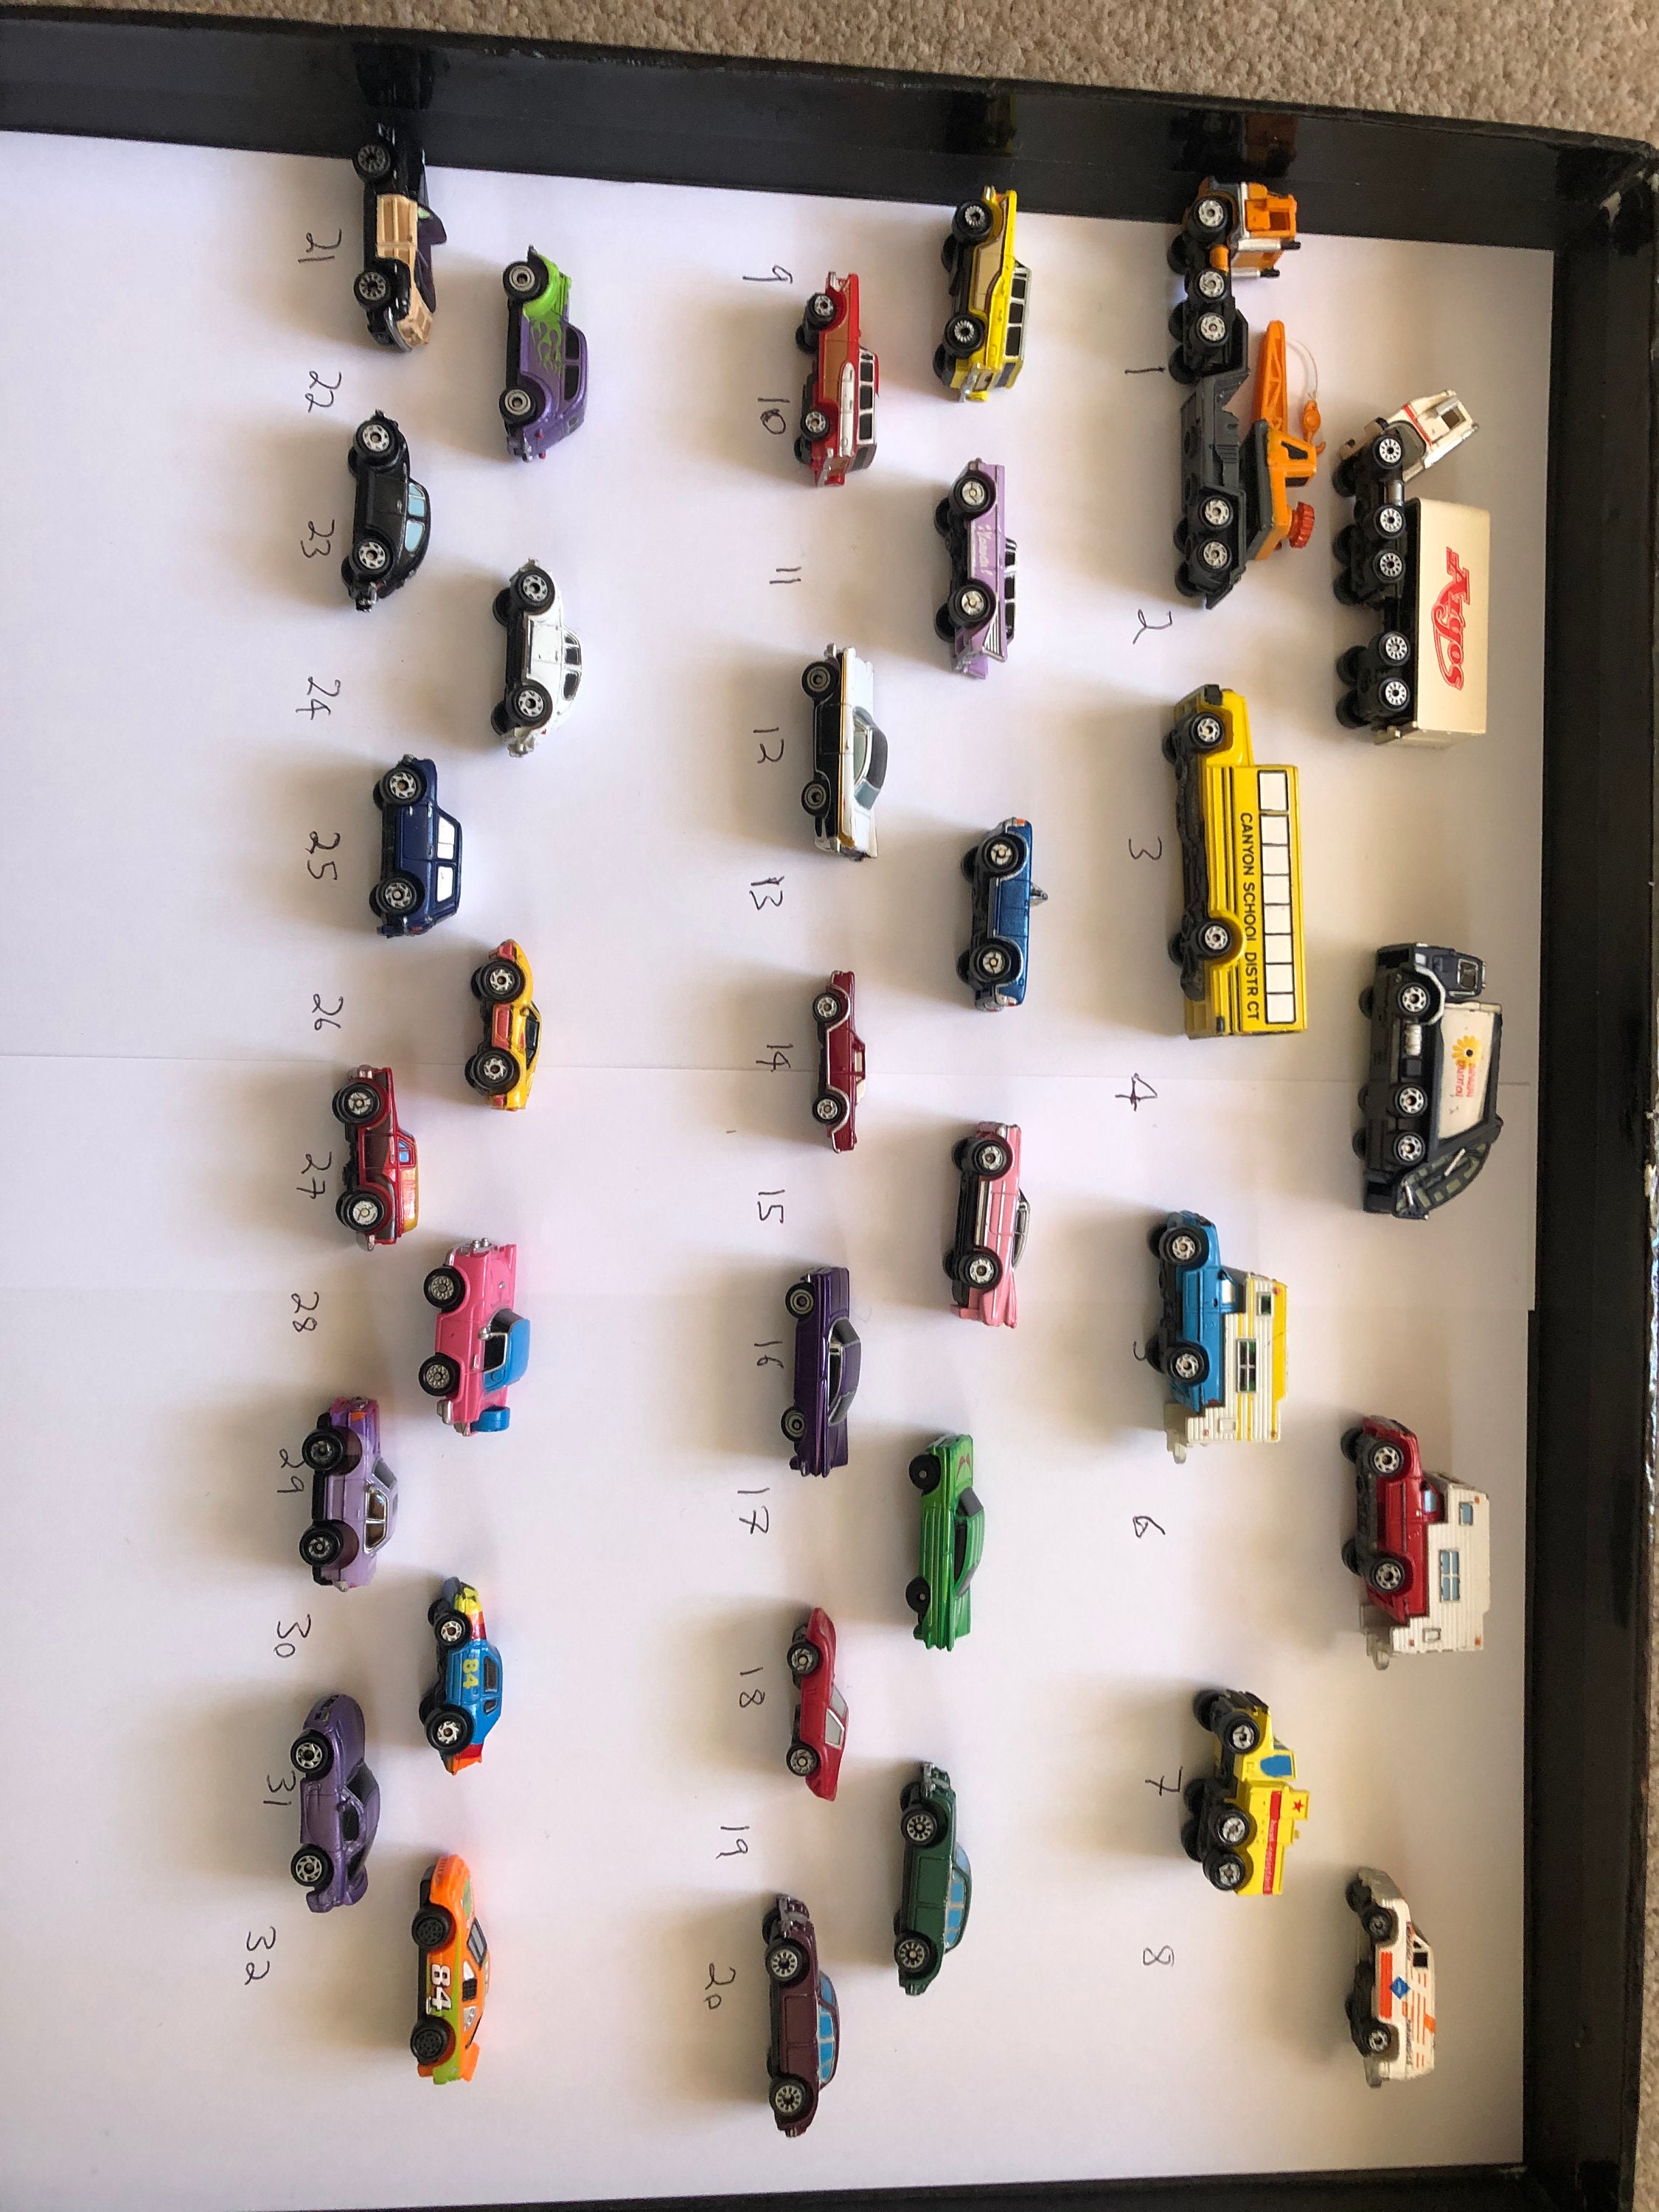 Micro Machines Vintage Rare Vehicles Please Choose From Drop Down List 